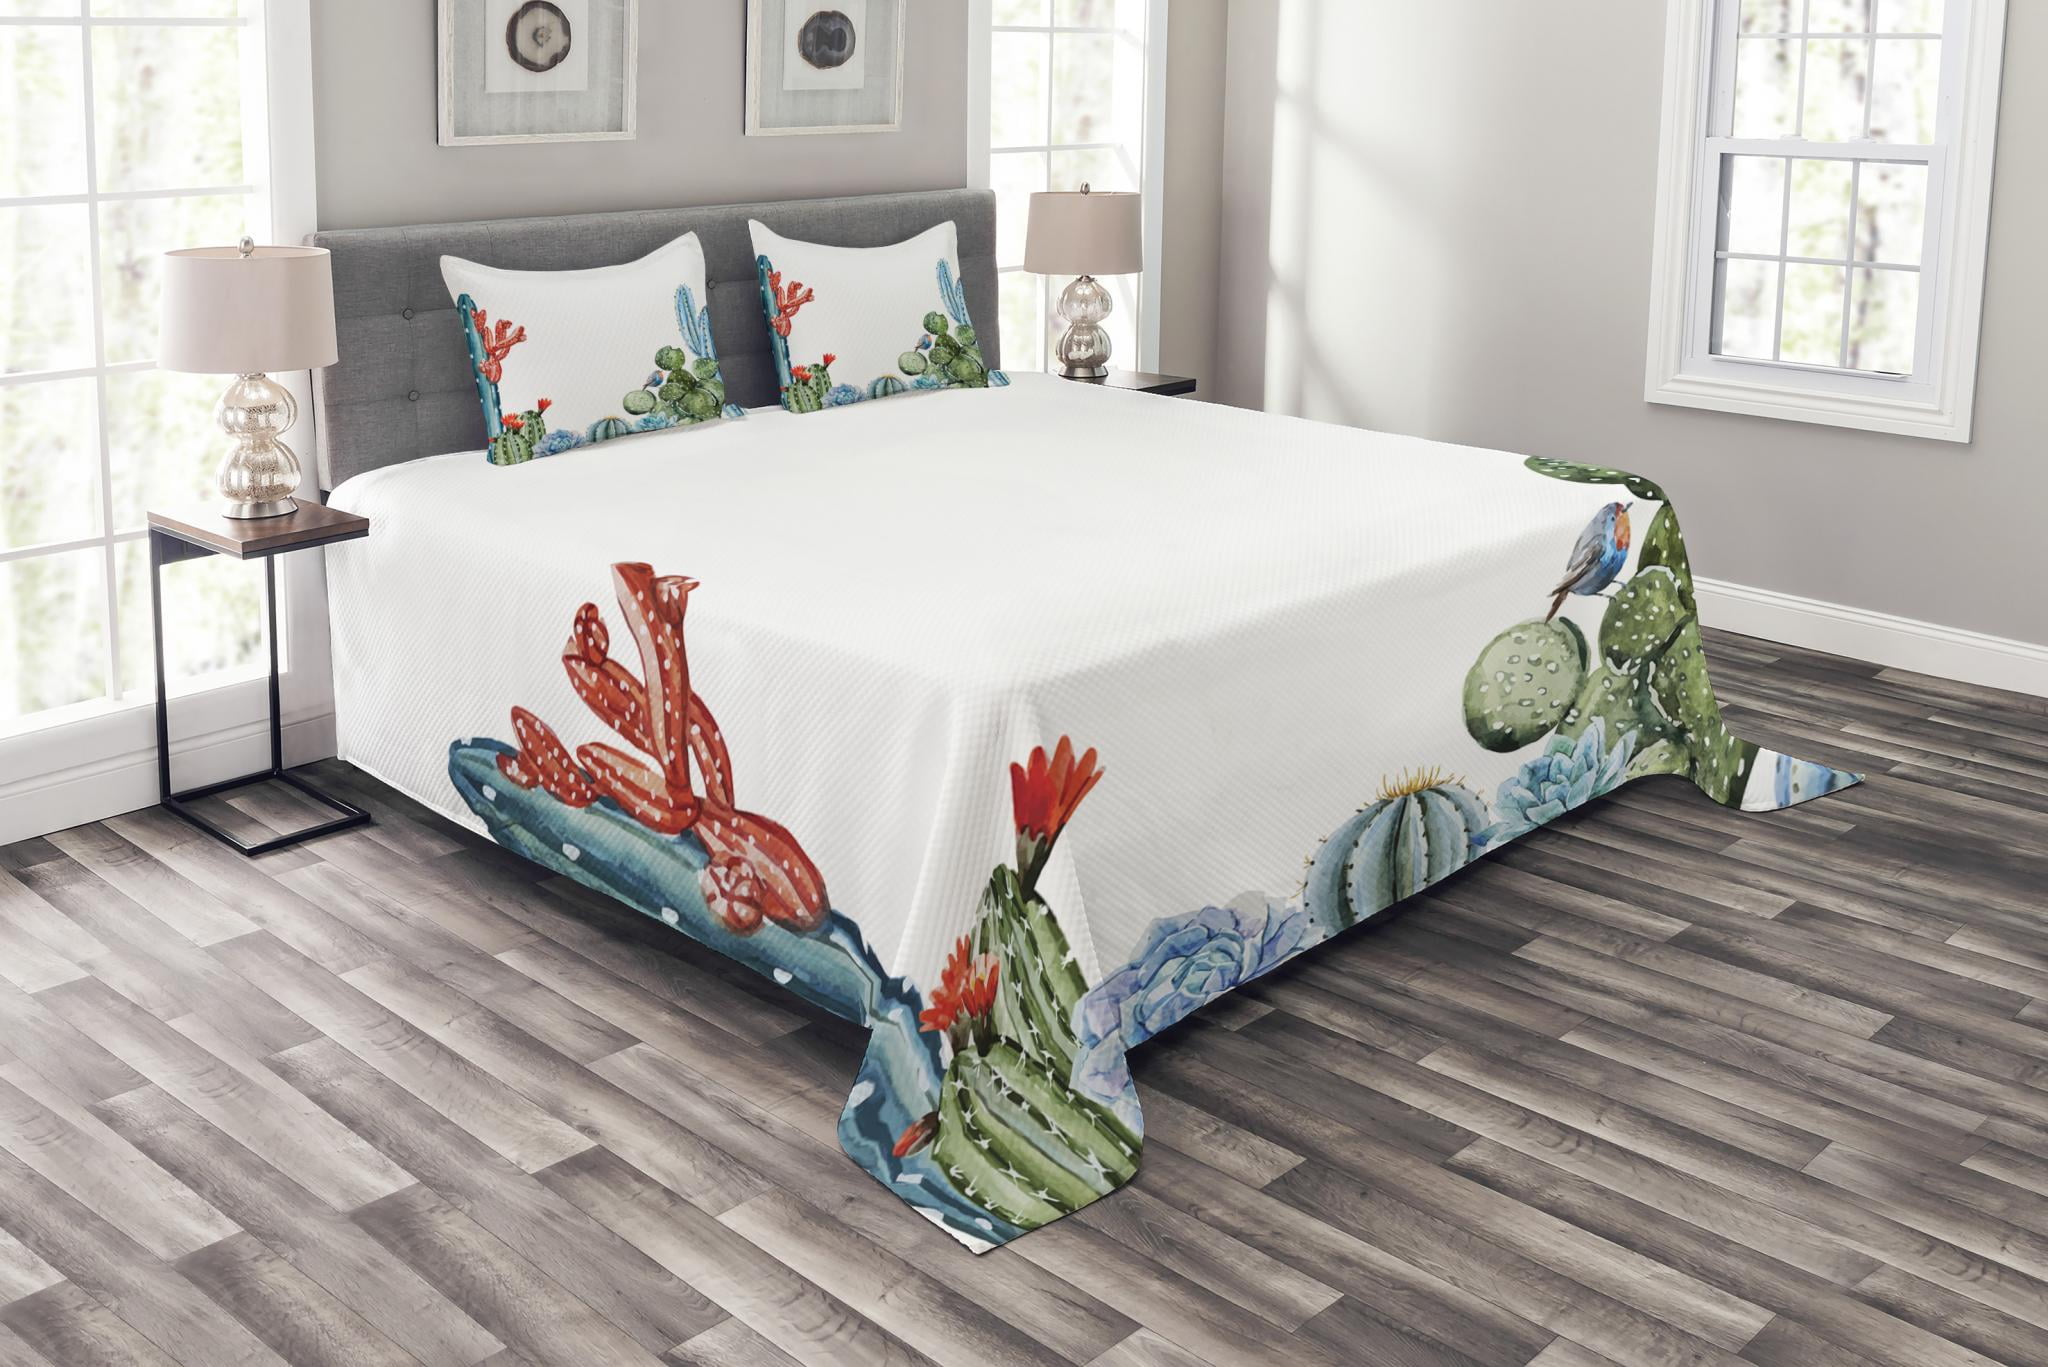 Ambesonne Cactus Duvet Cover Set Queen Size Decorative 3 Piece Bedding Set with 2 Pillow Shams Mint Green Spring Garden with Boho Style Bouquet of Thorny Plants Blossoms Arrows Feathers